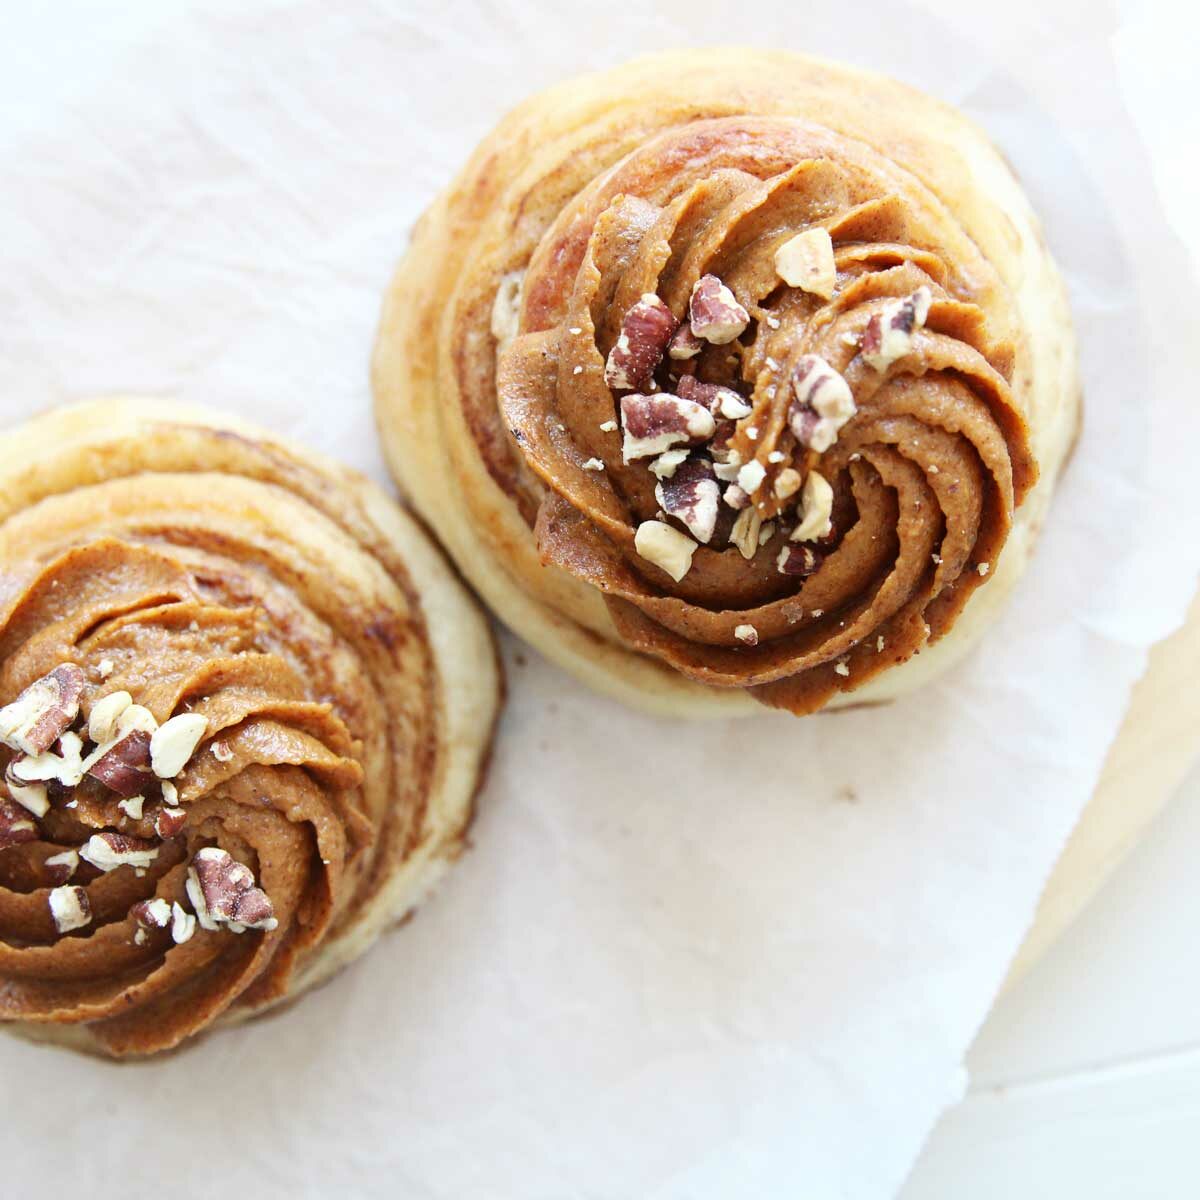 Healthy Cinnamon Roll Icing & Frosting (Over 20 Customization Ideas!) - Cinnamon Roll Icing